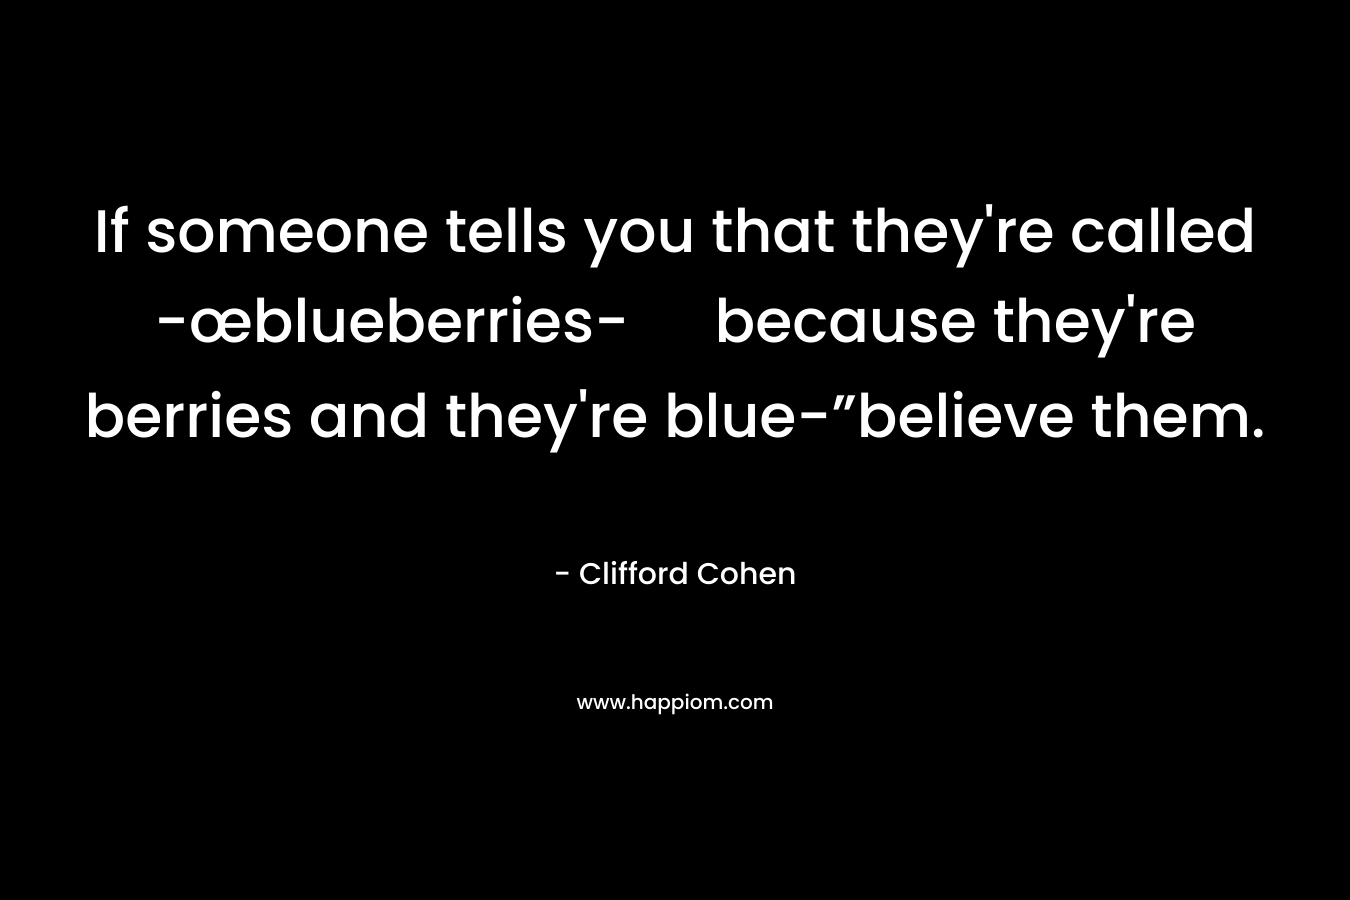 If someone tells you that they're called -œblueberries- because they're berries and they're blue-”believe them.